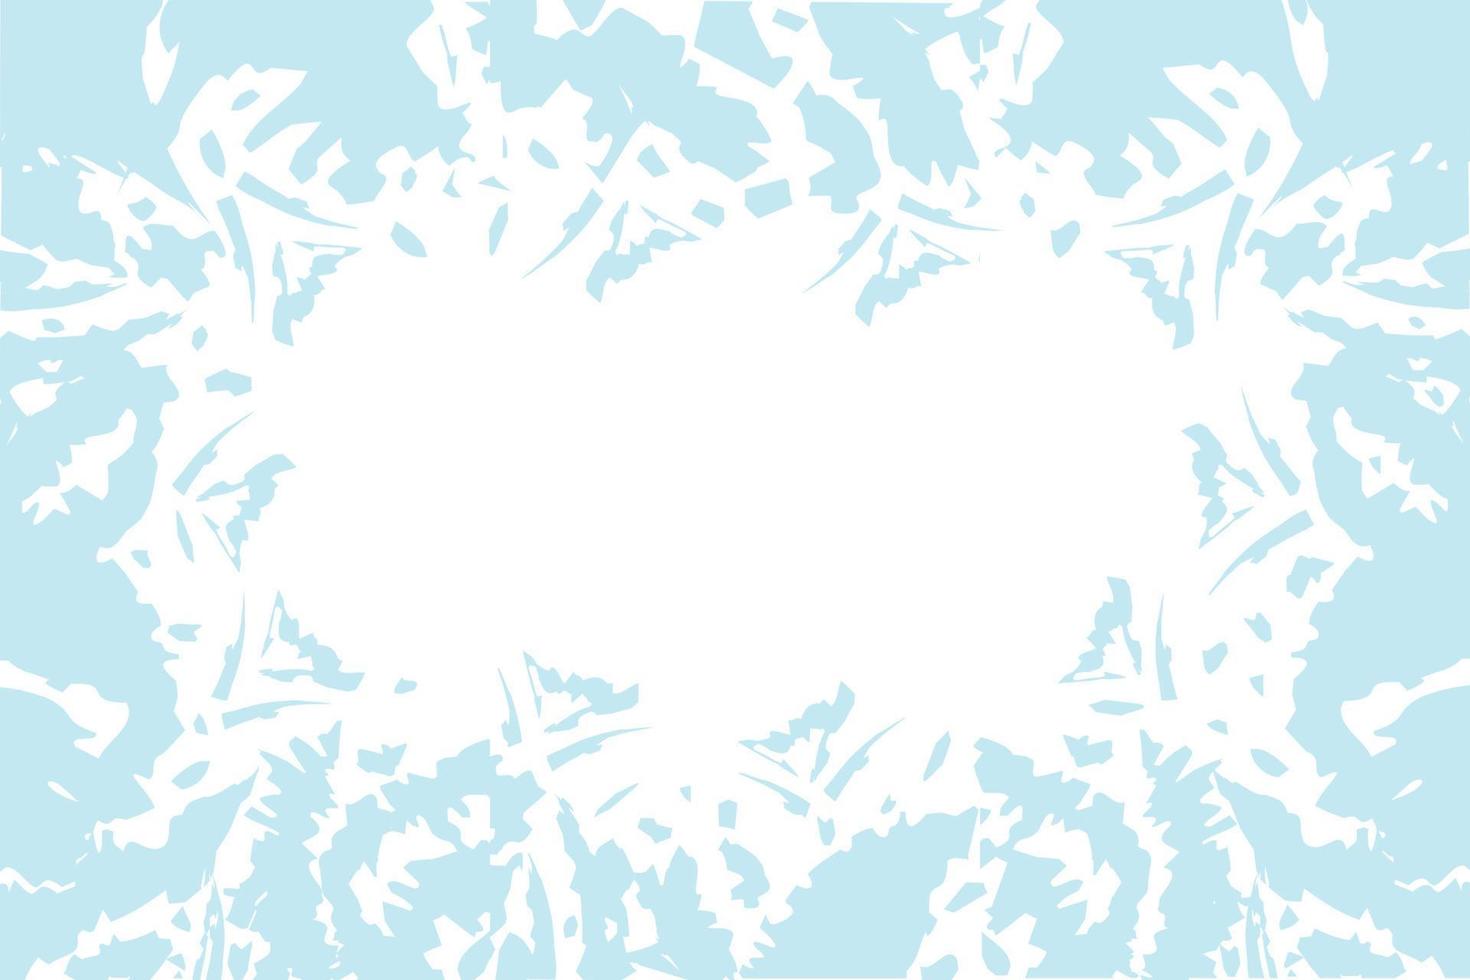 Abstract motley blots in trendy wintry blue hues in watercolor manner. Background texture. Isolate vector